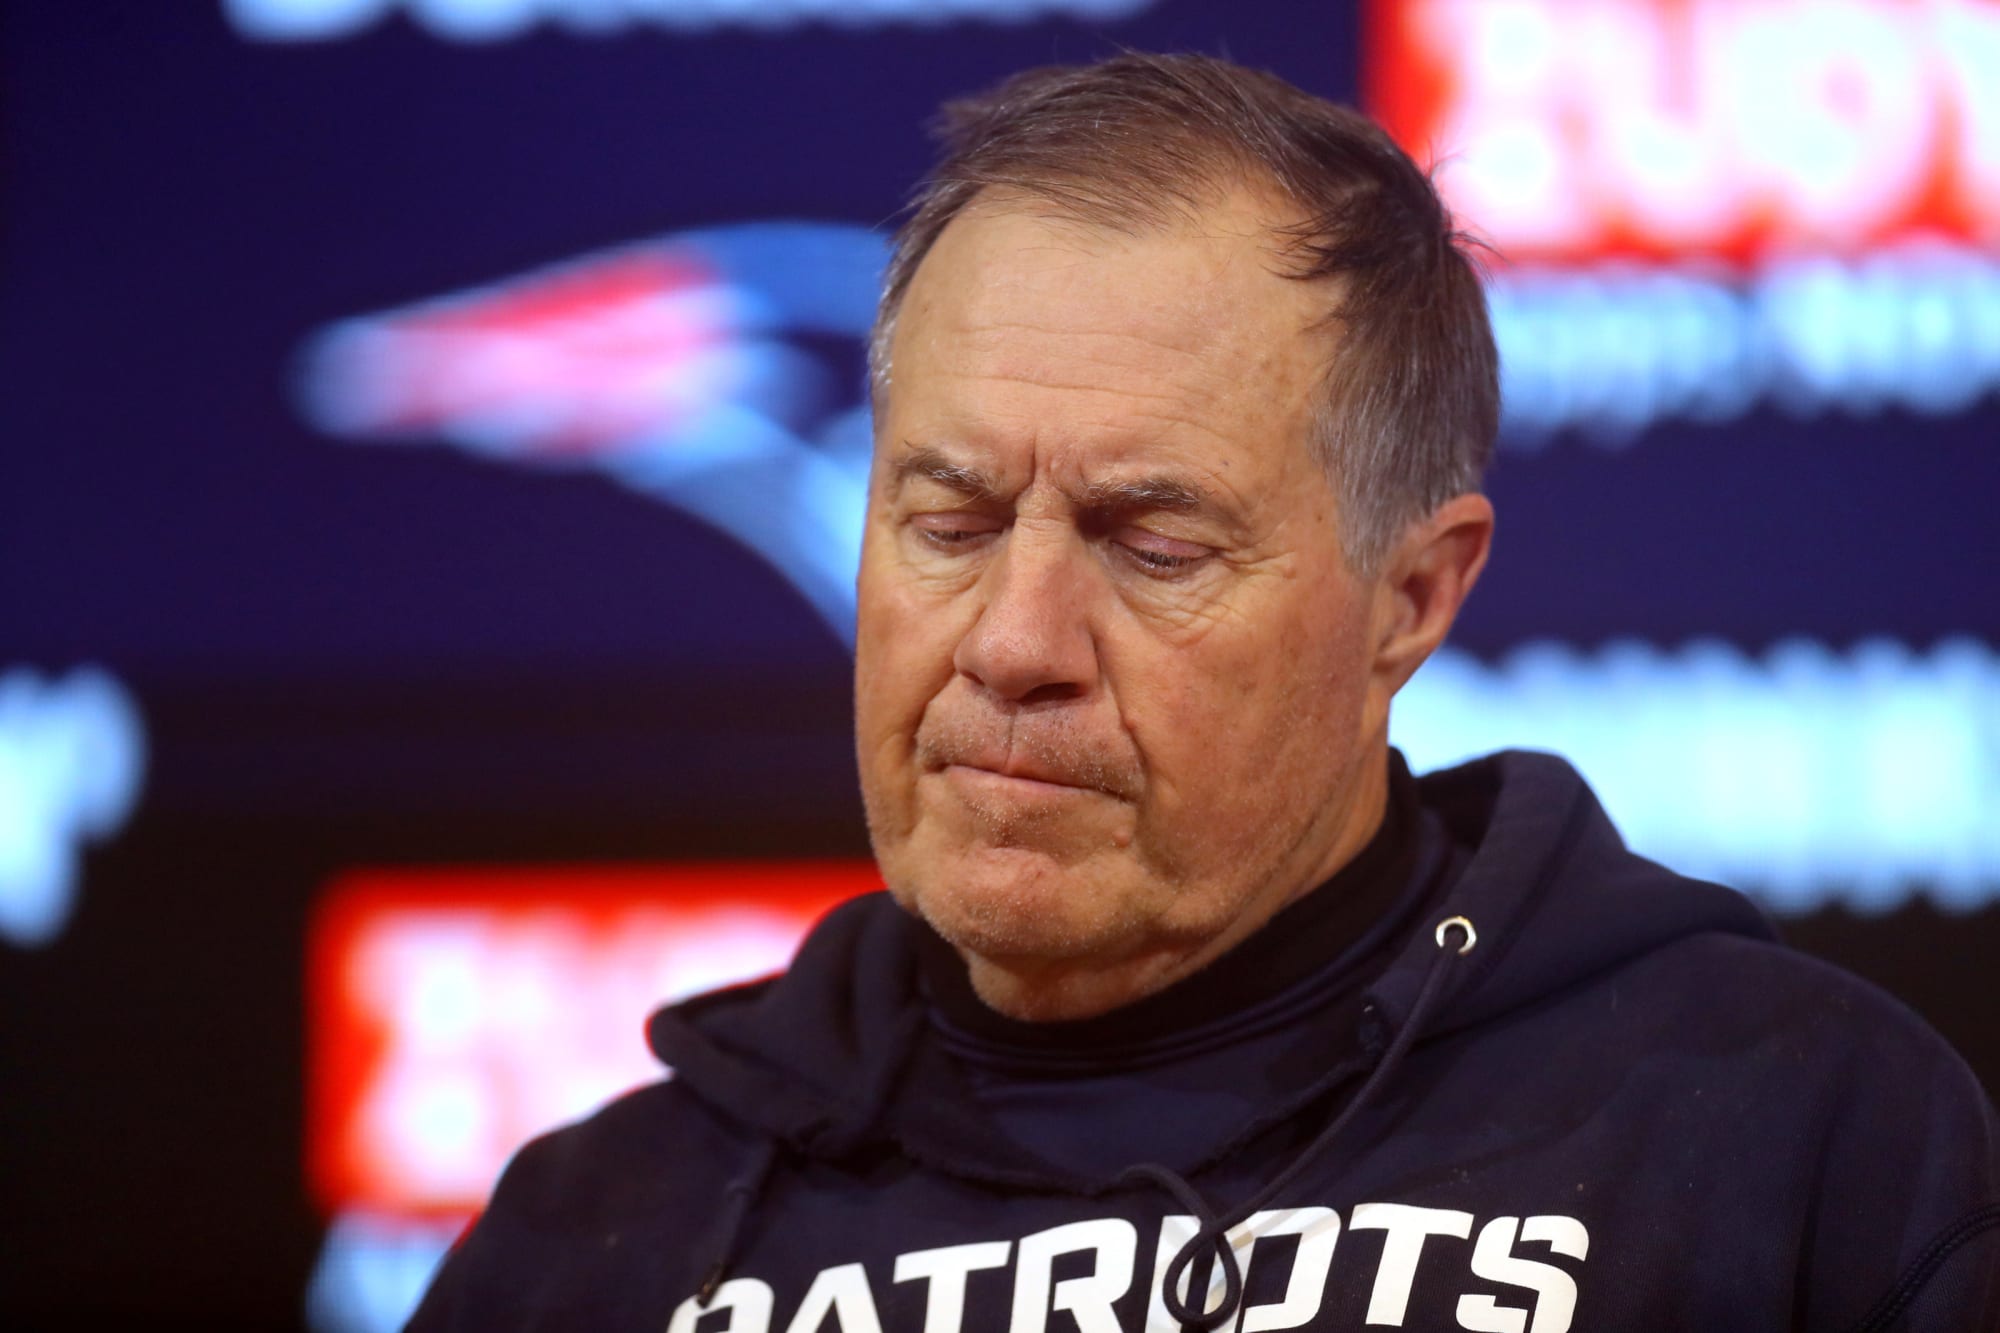 One troubling trend for Bill Belichick and the New England Patriots